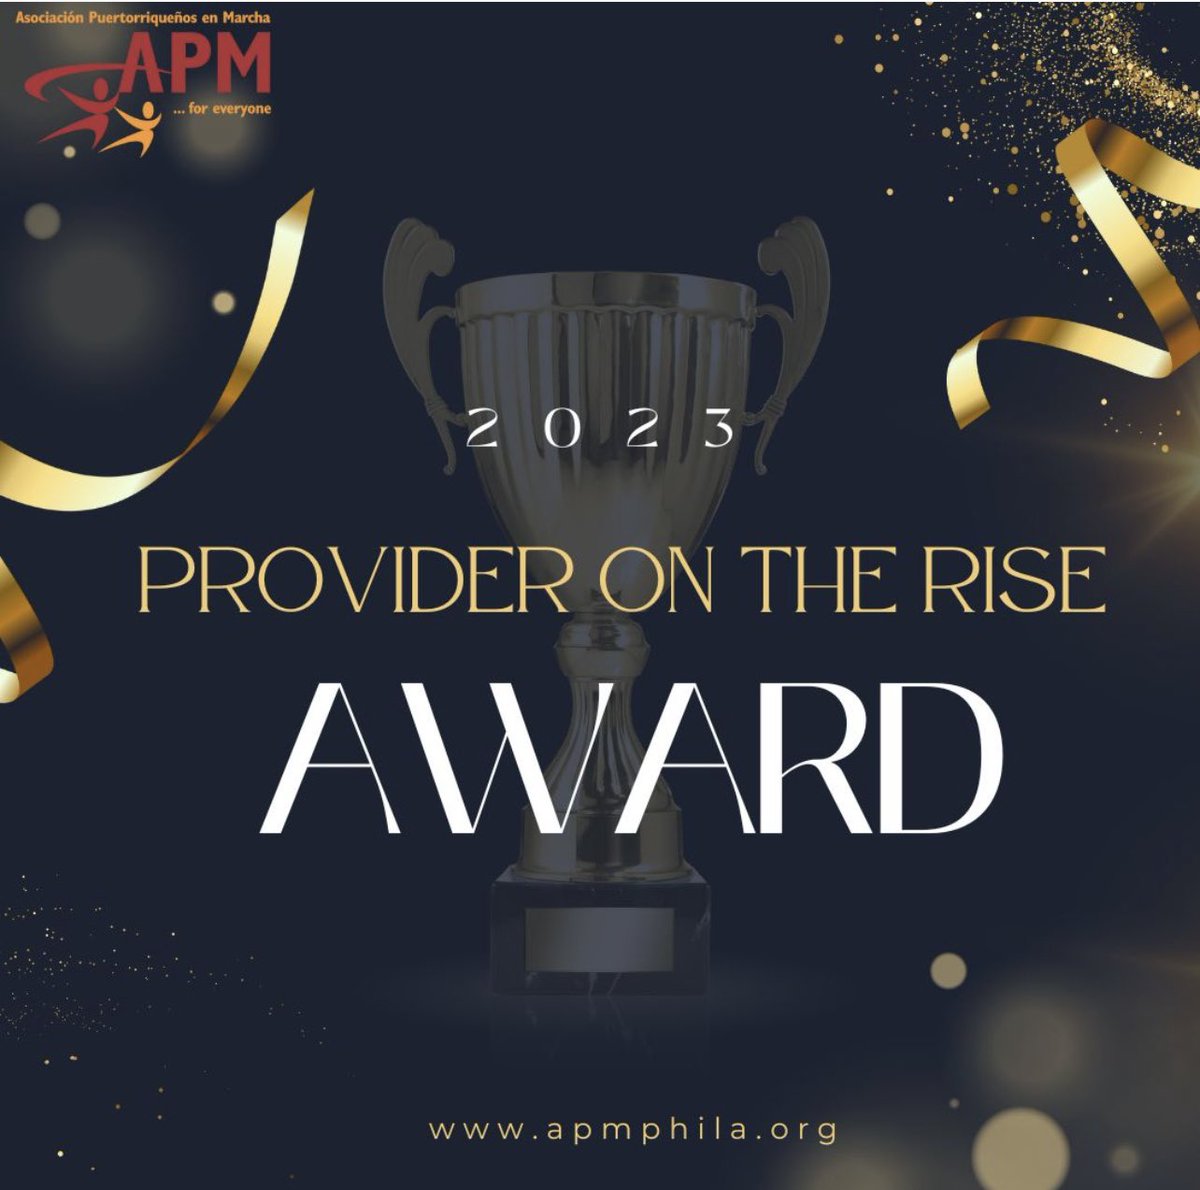 With great joy we would like to share that APM won the 'Provider on the Rise' award by the CBH Evidence-based department at EPIC!